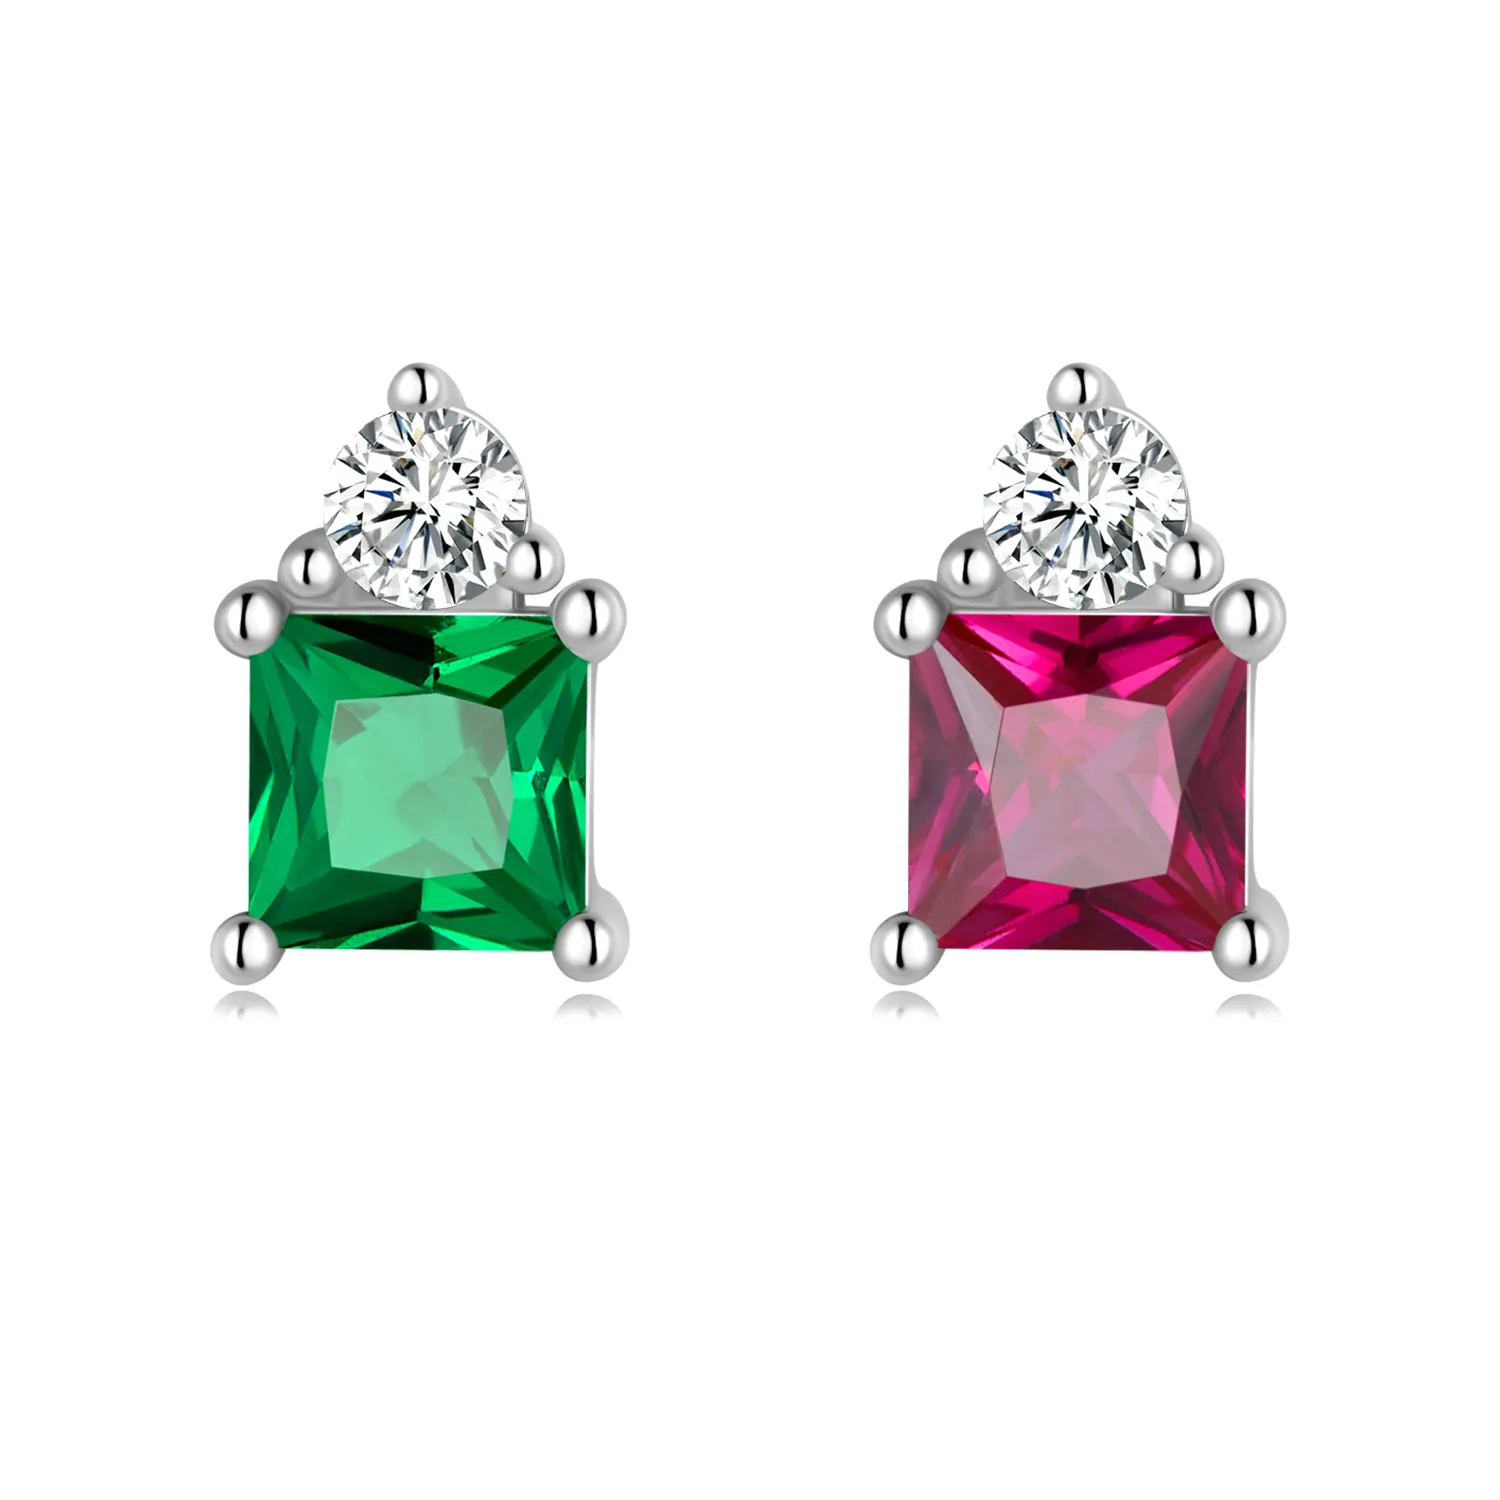 Pandora Style Colorful Princess Party Candies Stud Earrings - SCE1465